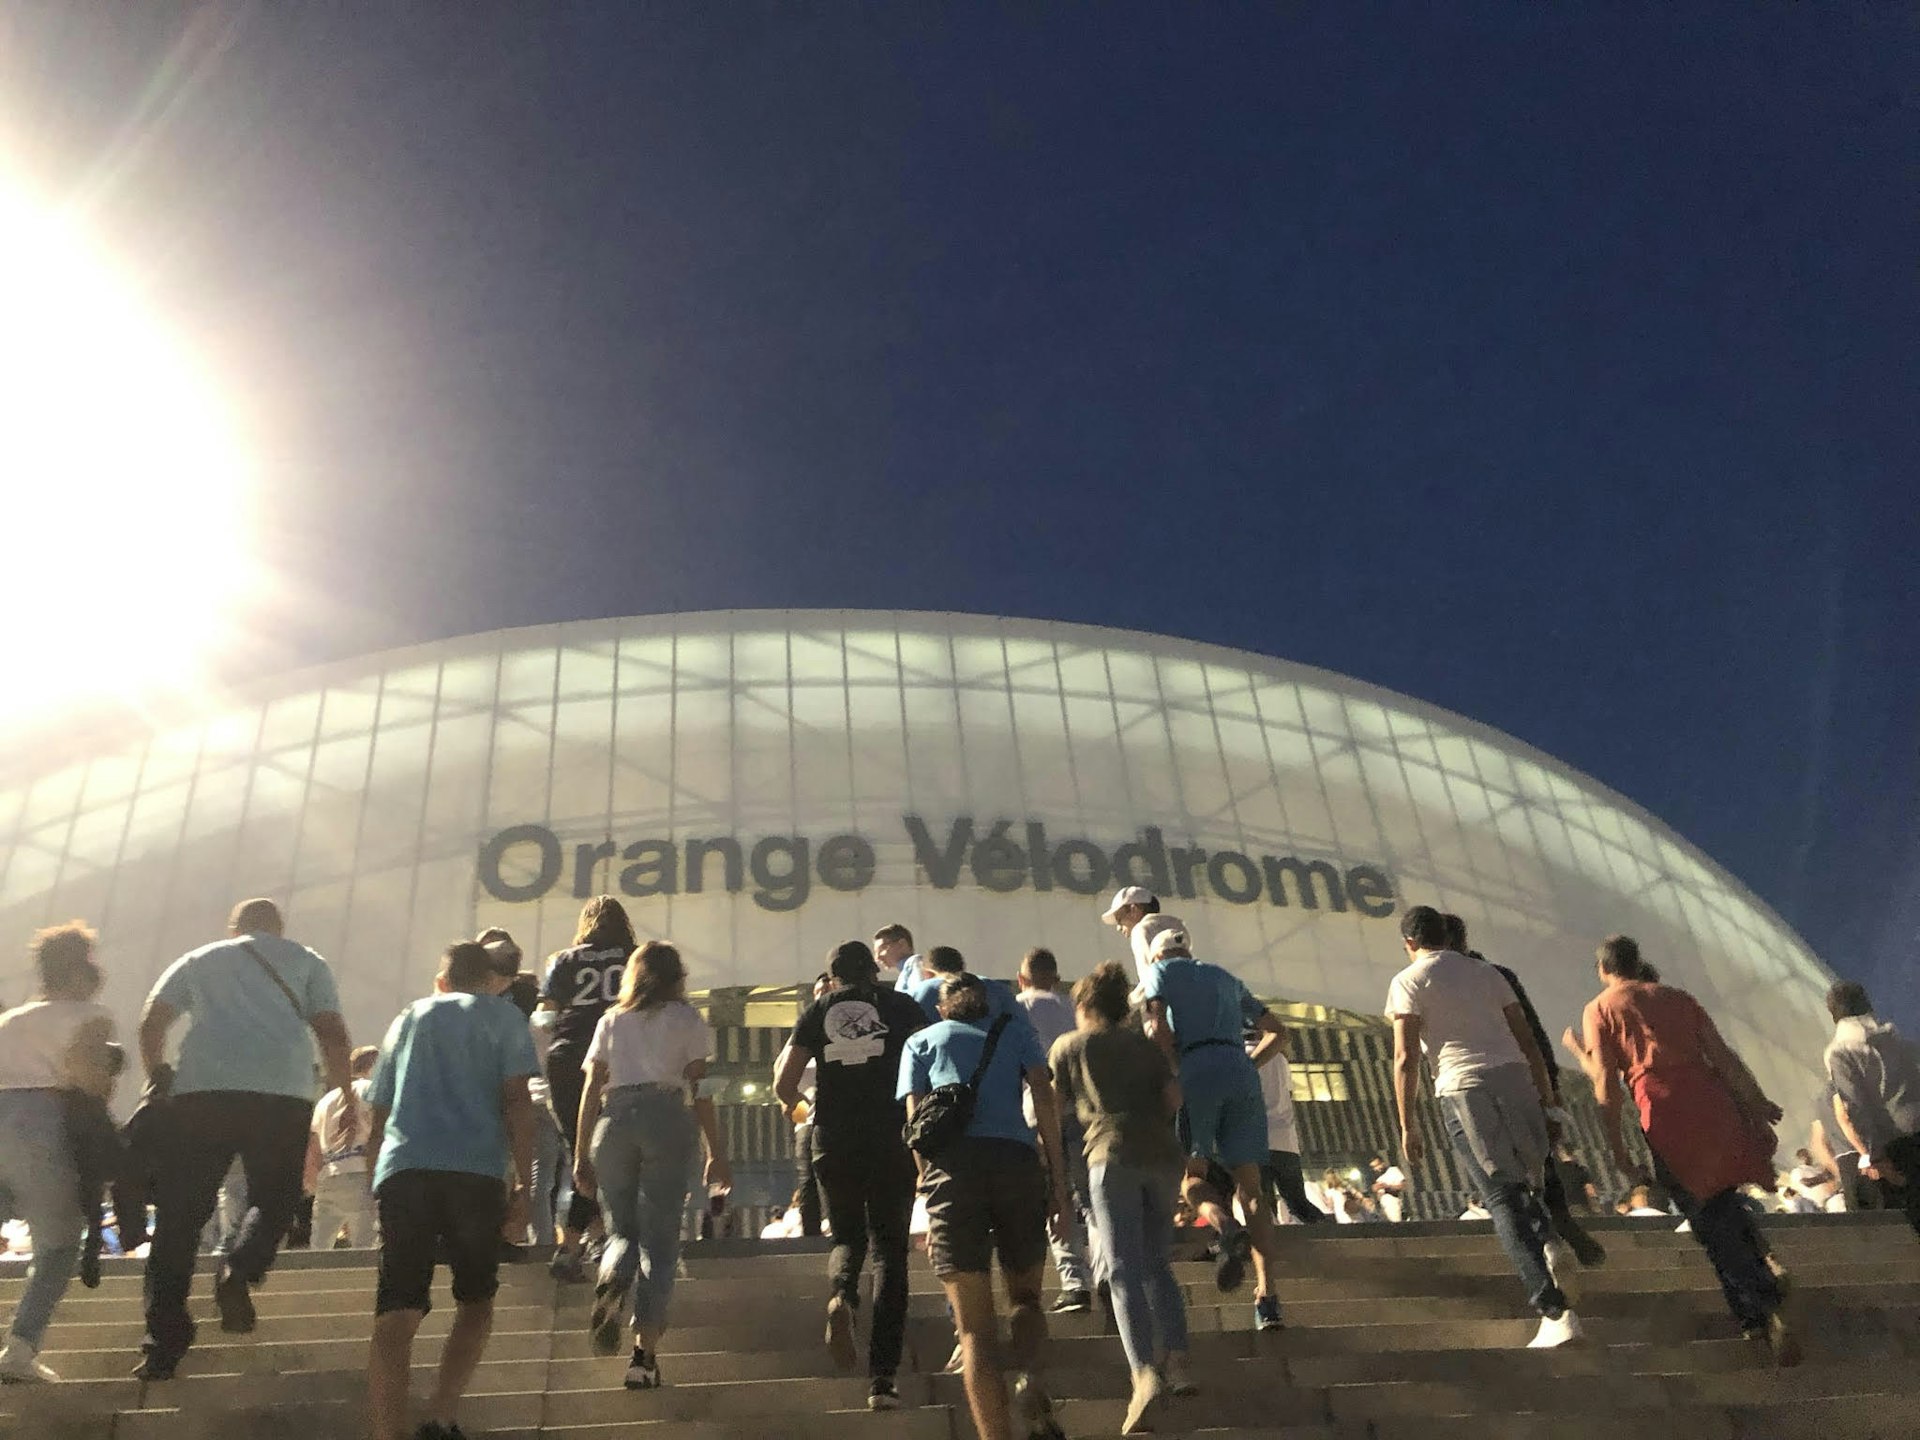 Fans walking up the stairs to the Stade Vélodrome at night 